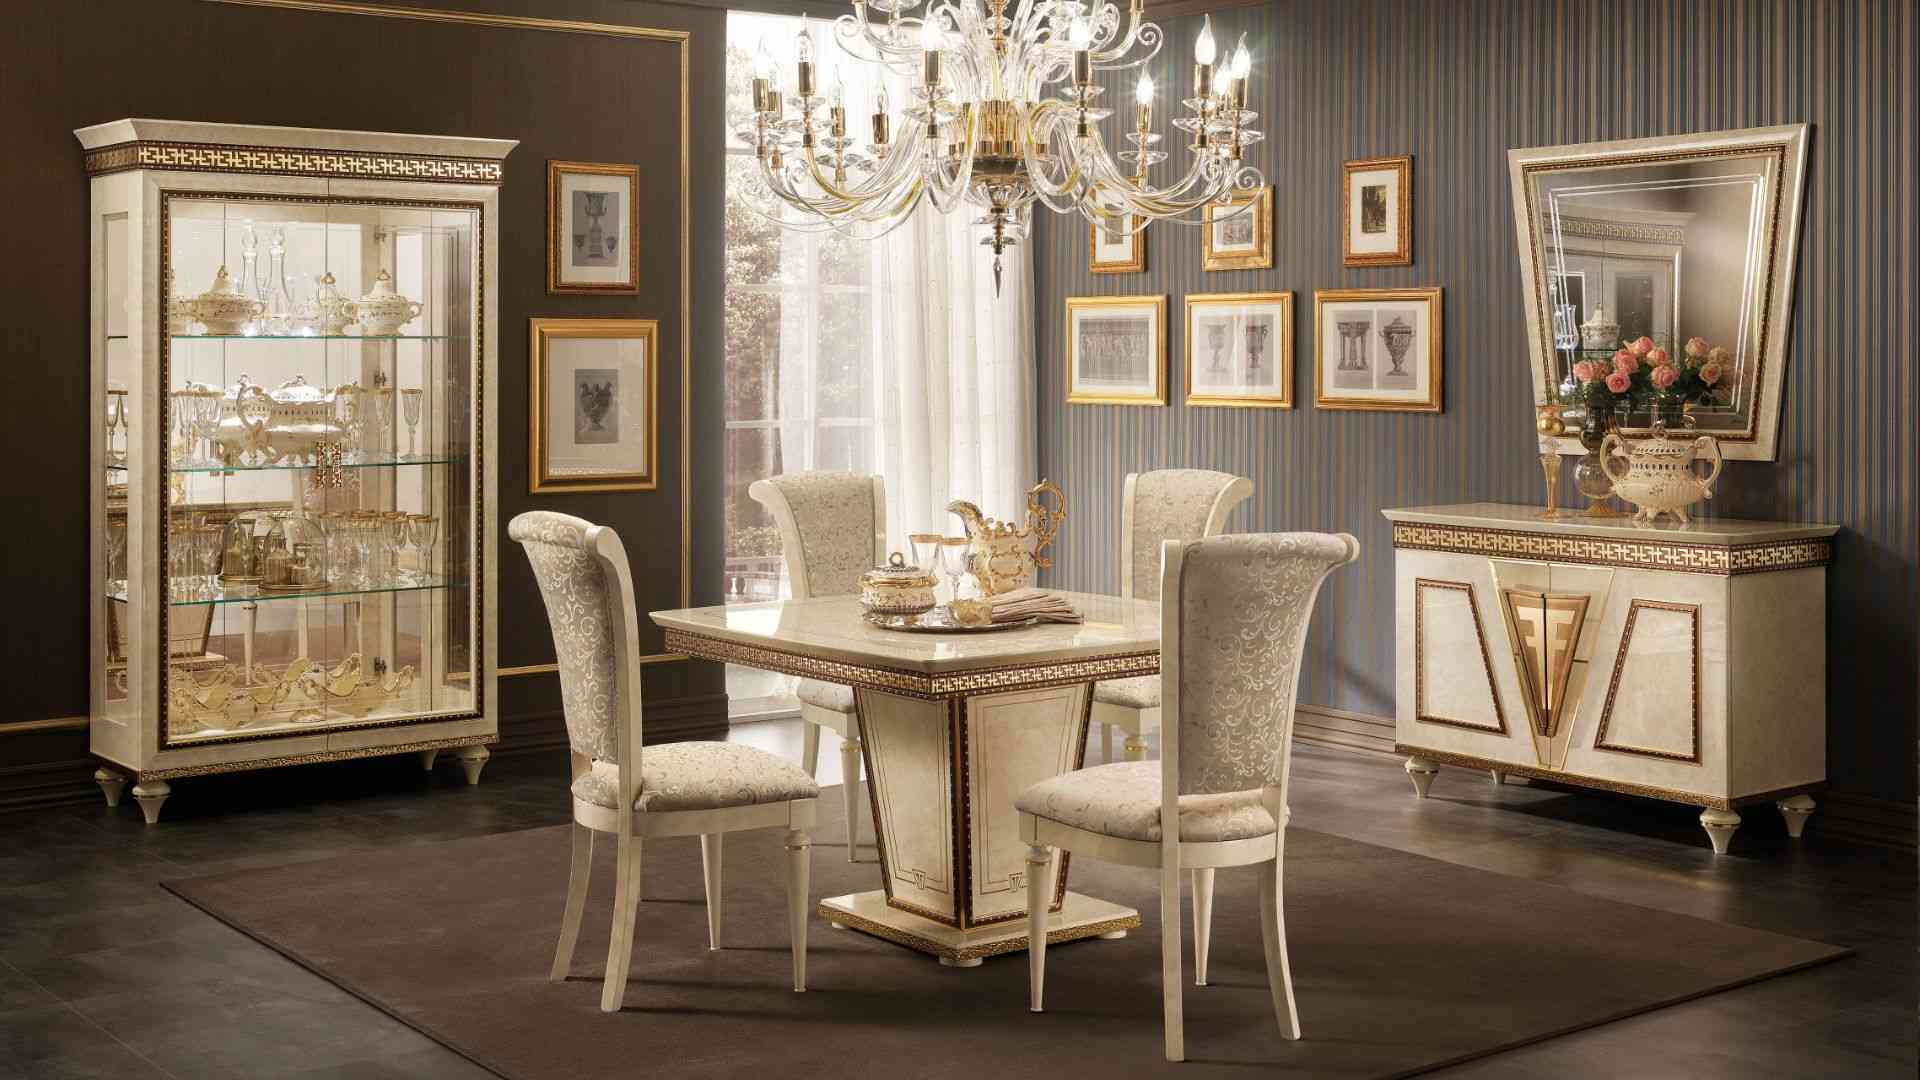 5 reasons to love a neoclassical interior design style: Fantasia collection